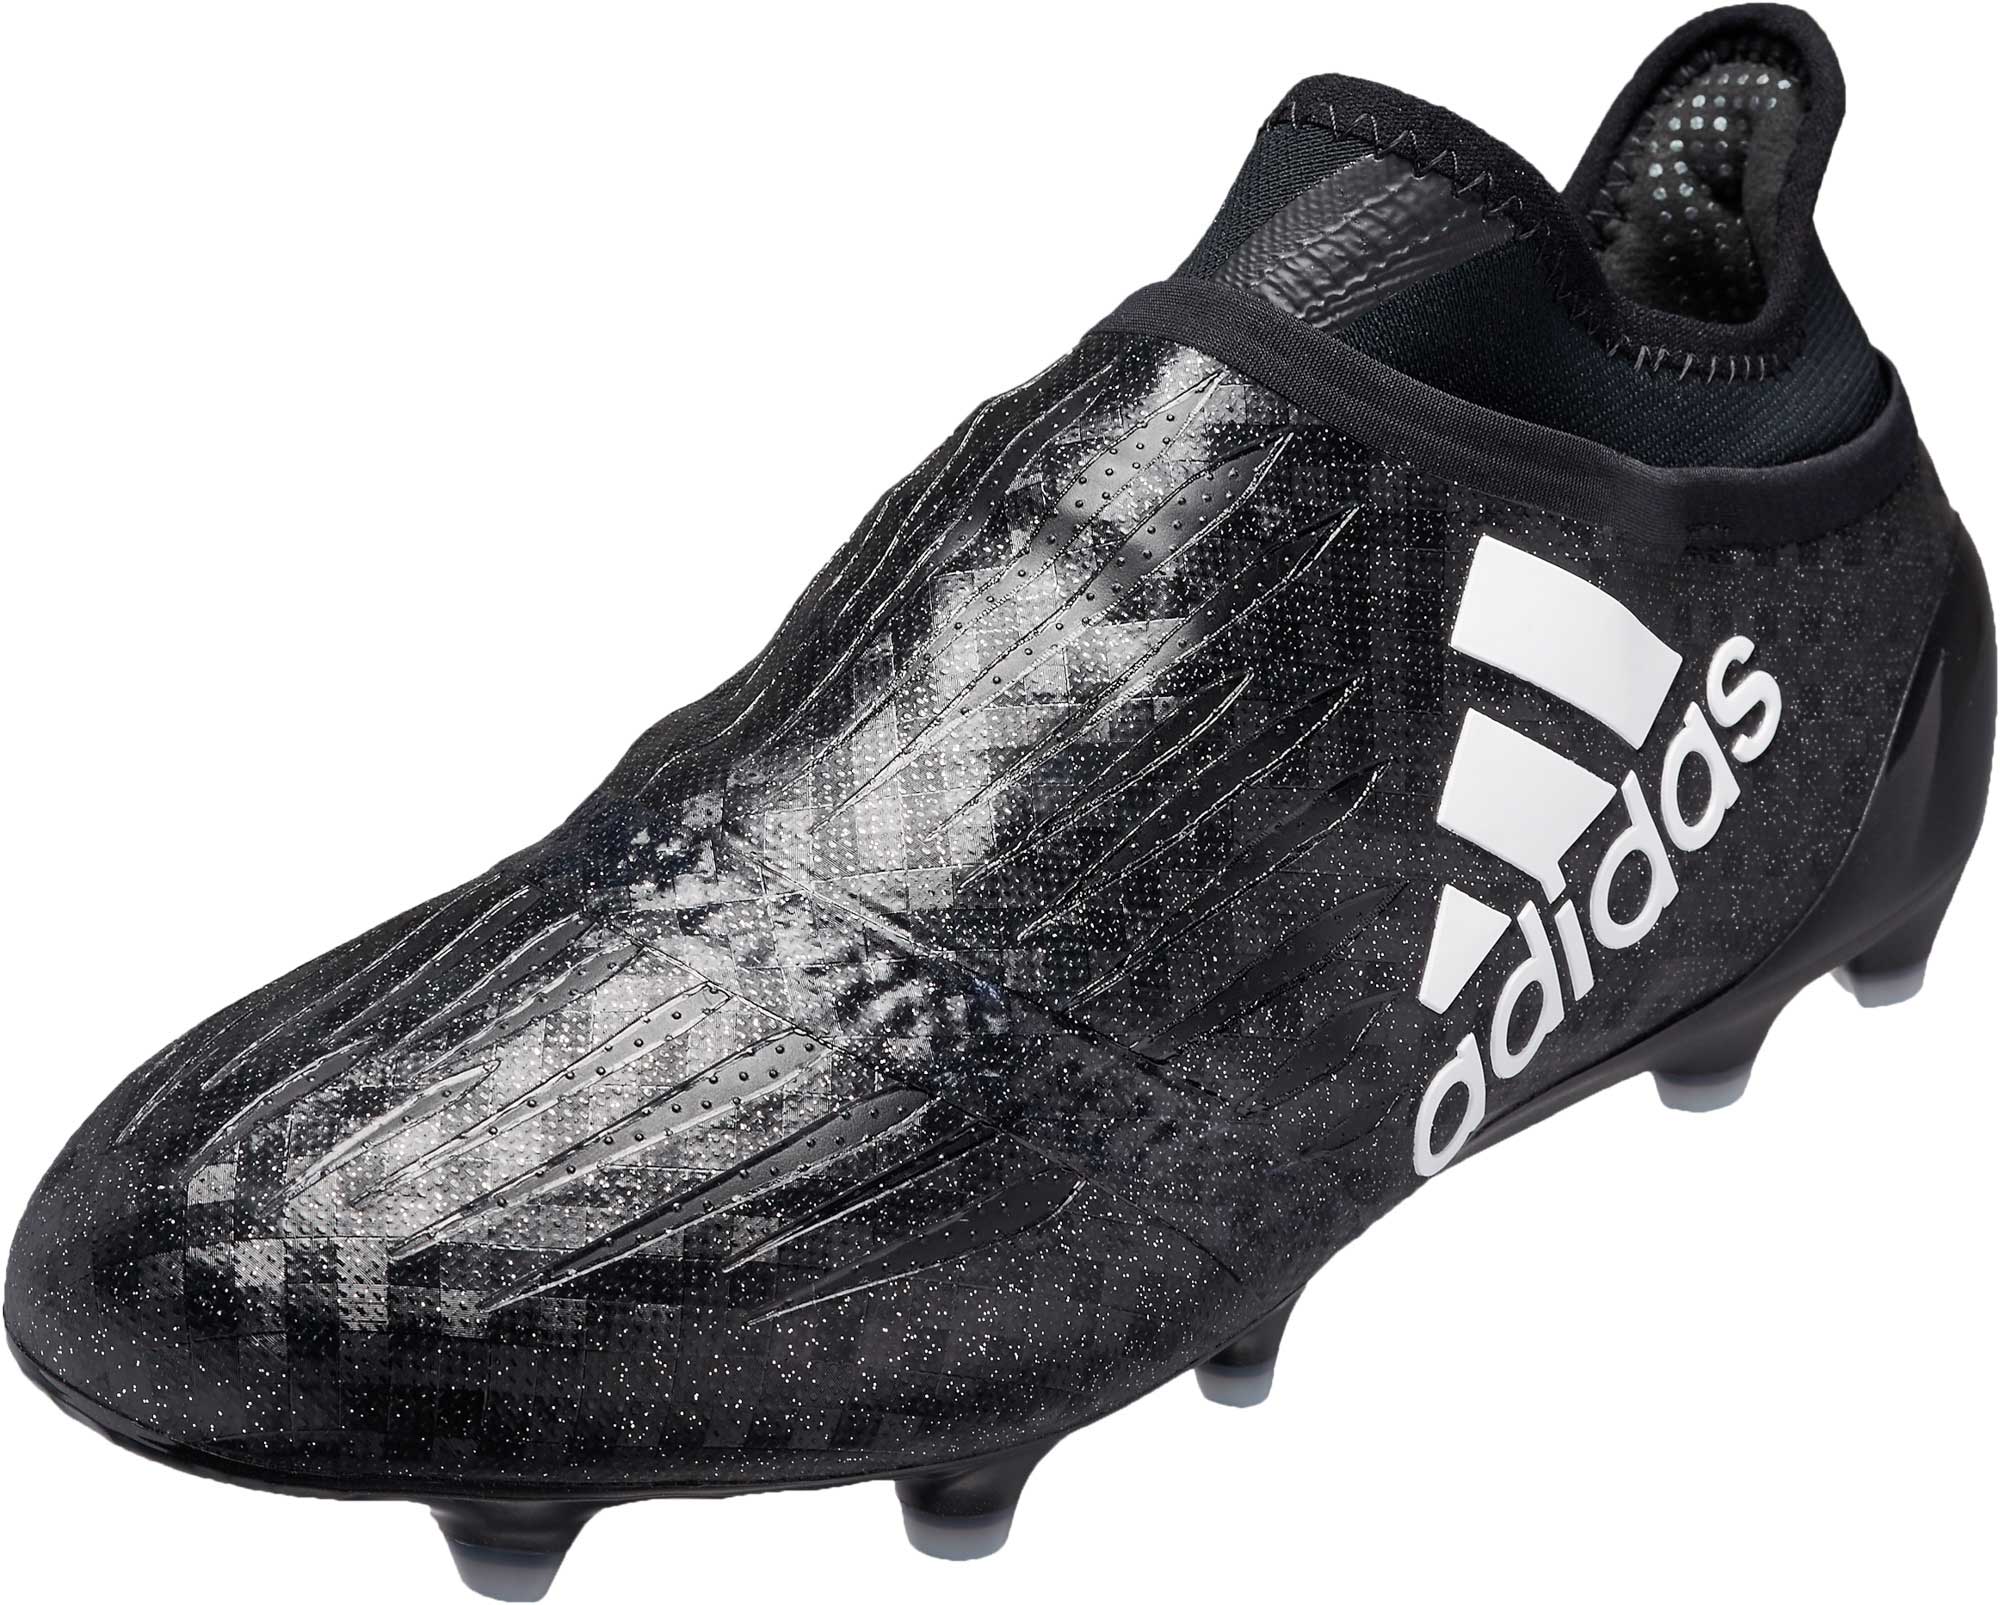 adidas X Purechaos Soccer Cleats - Black & White - Master